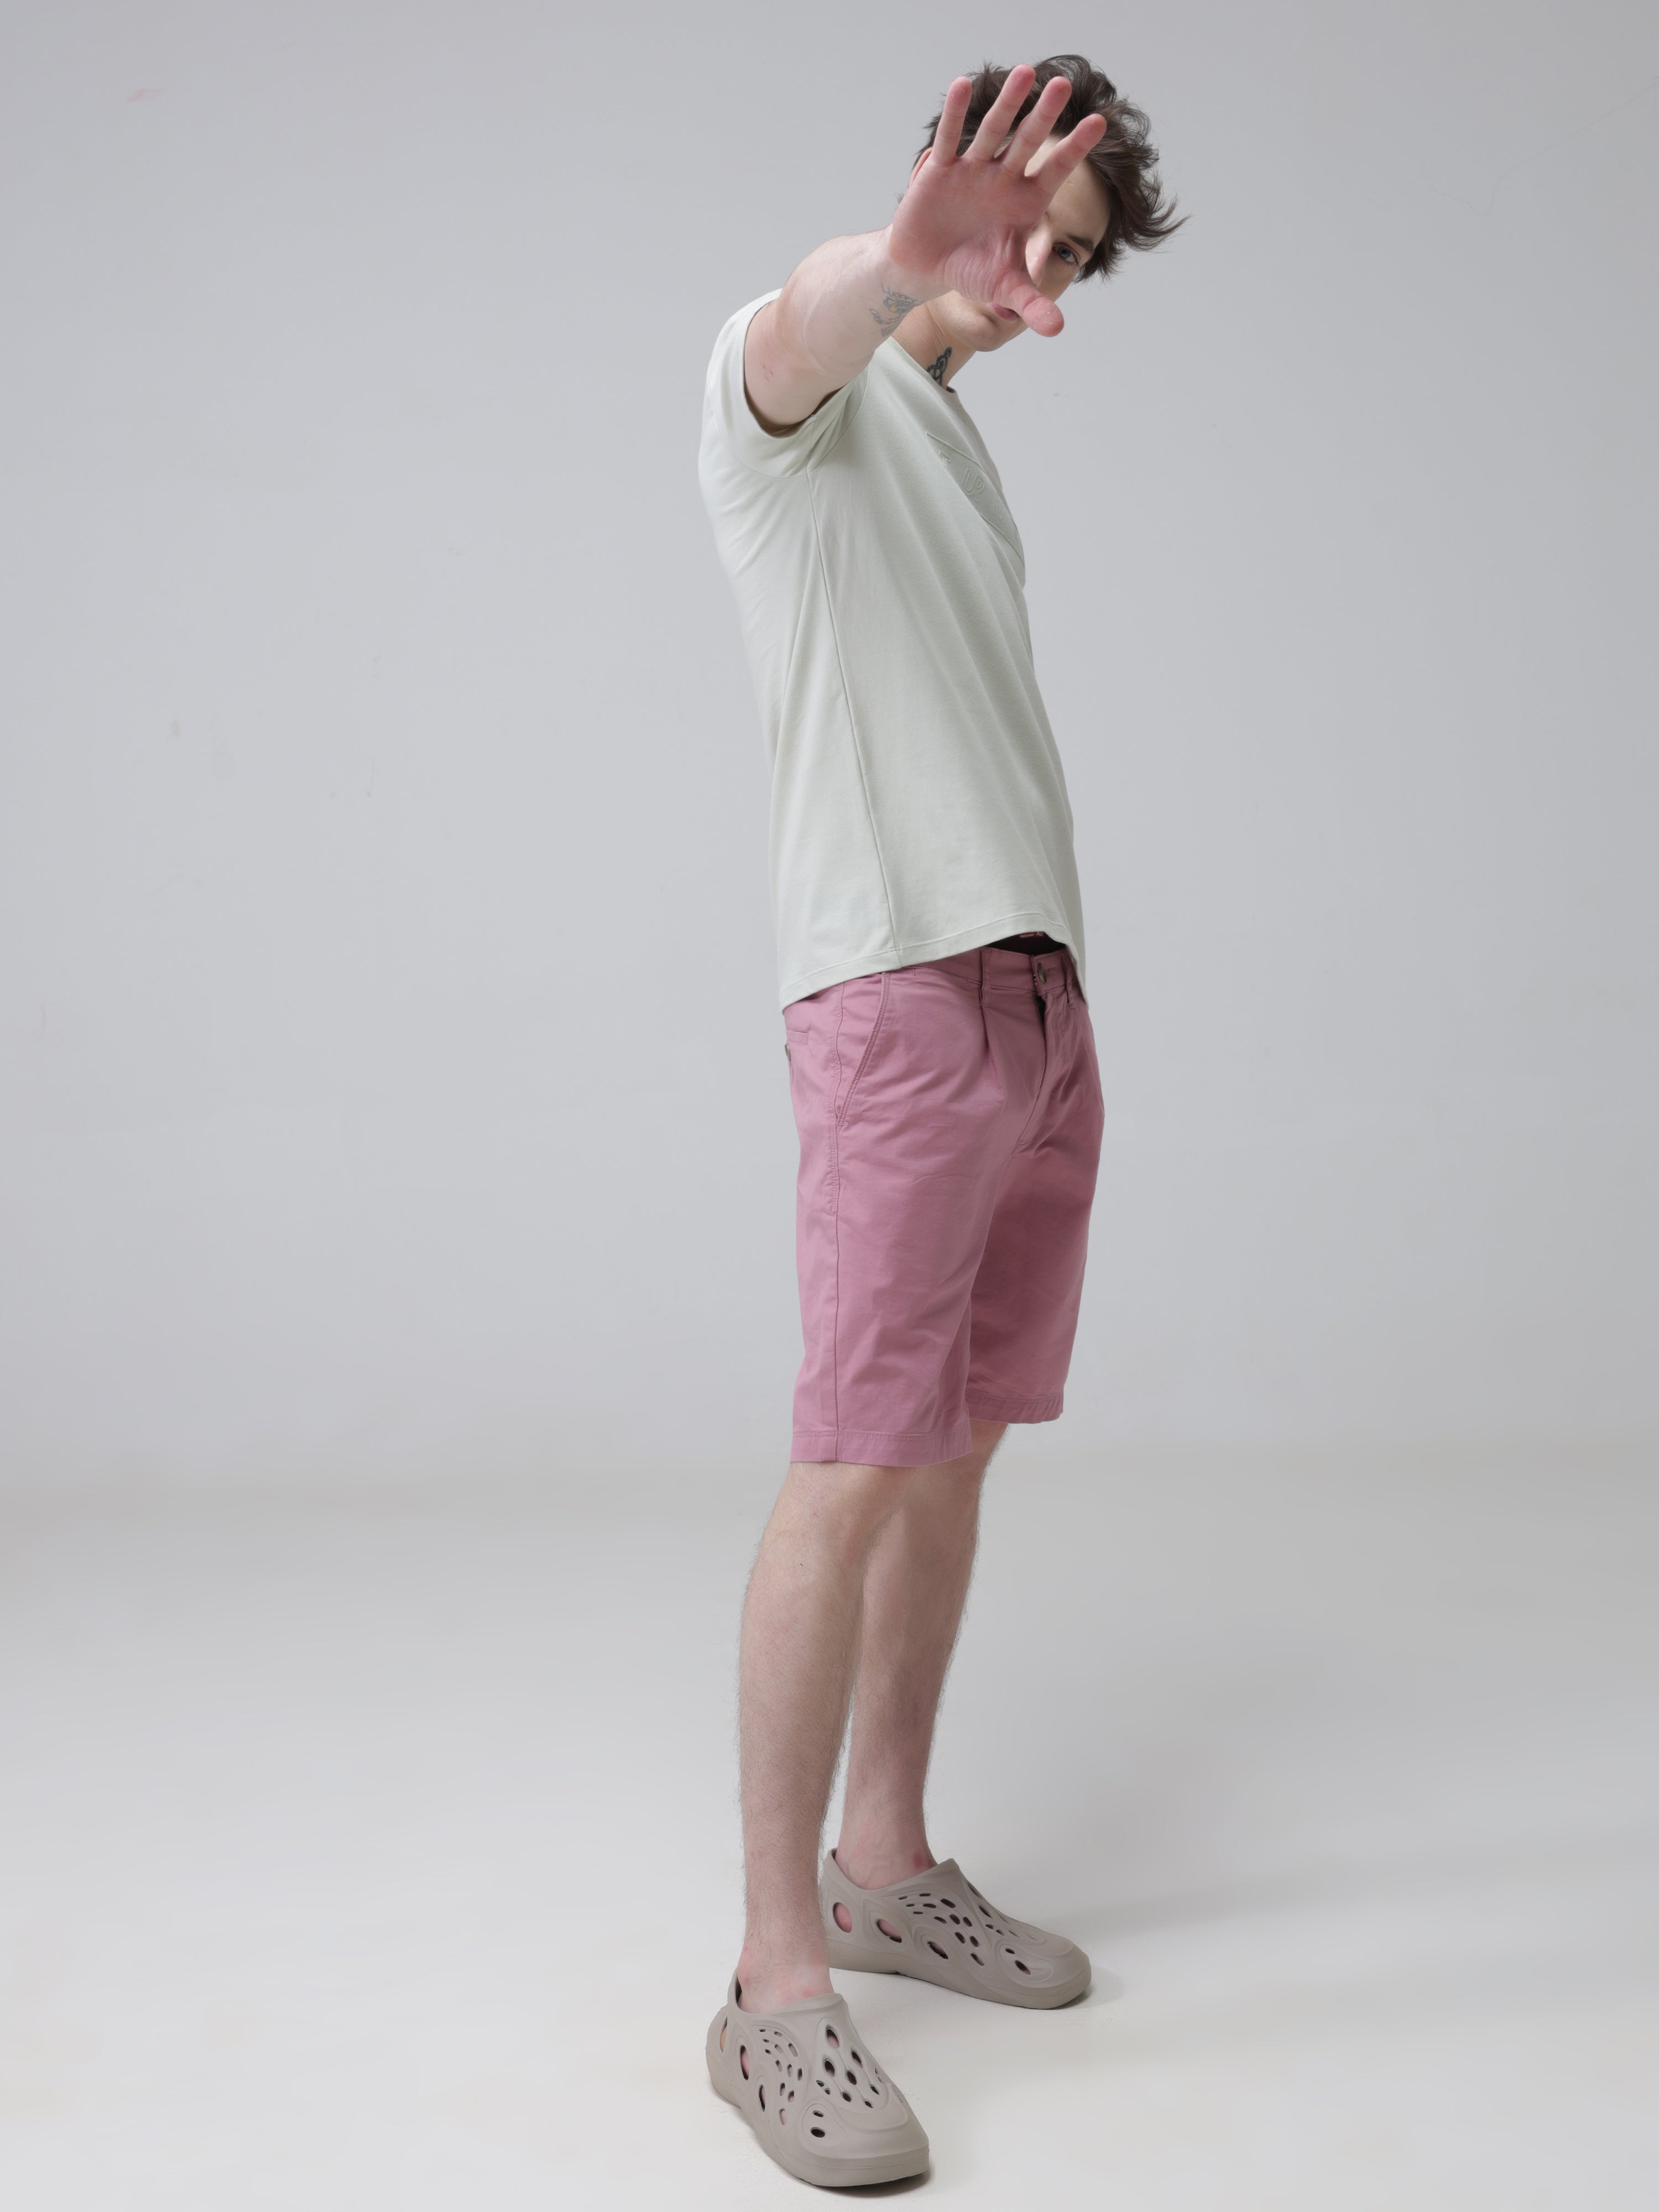 Man wearing Lime Enigma anti-stain and anti-odor Turms T-shirt with tailored fit and stretchable fabric, lifting hand, paired with pink shorts.